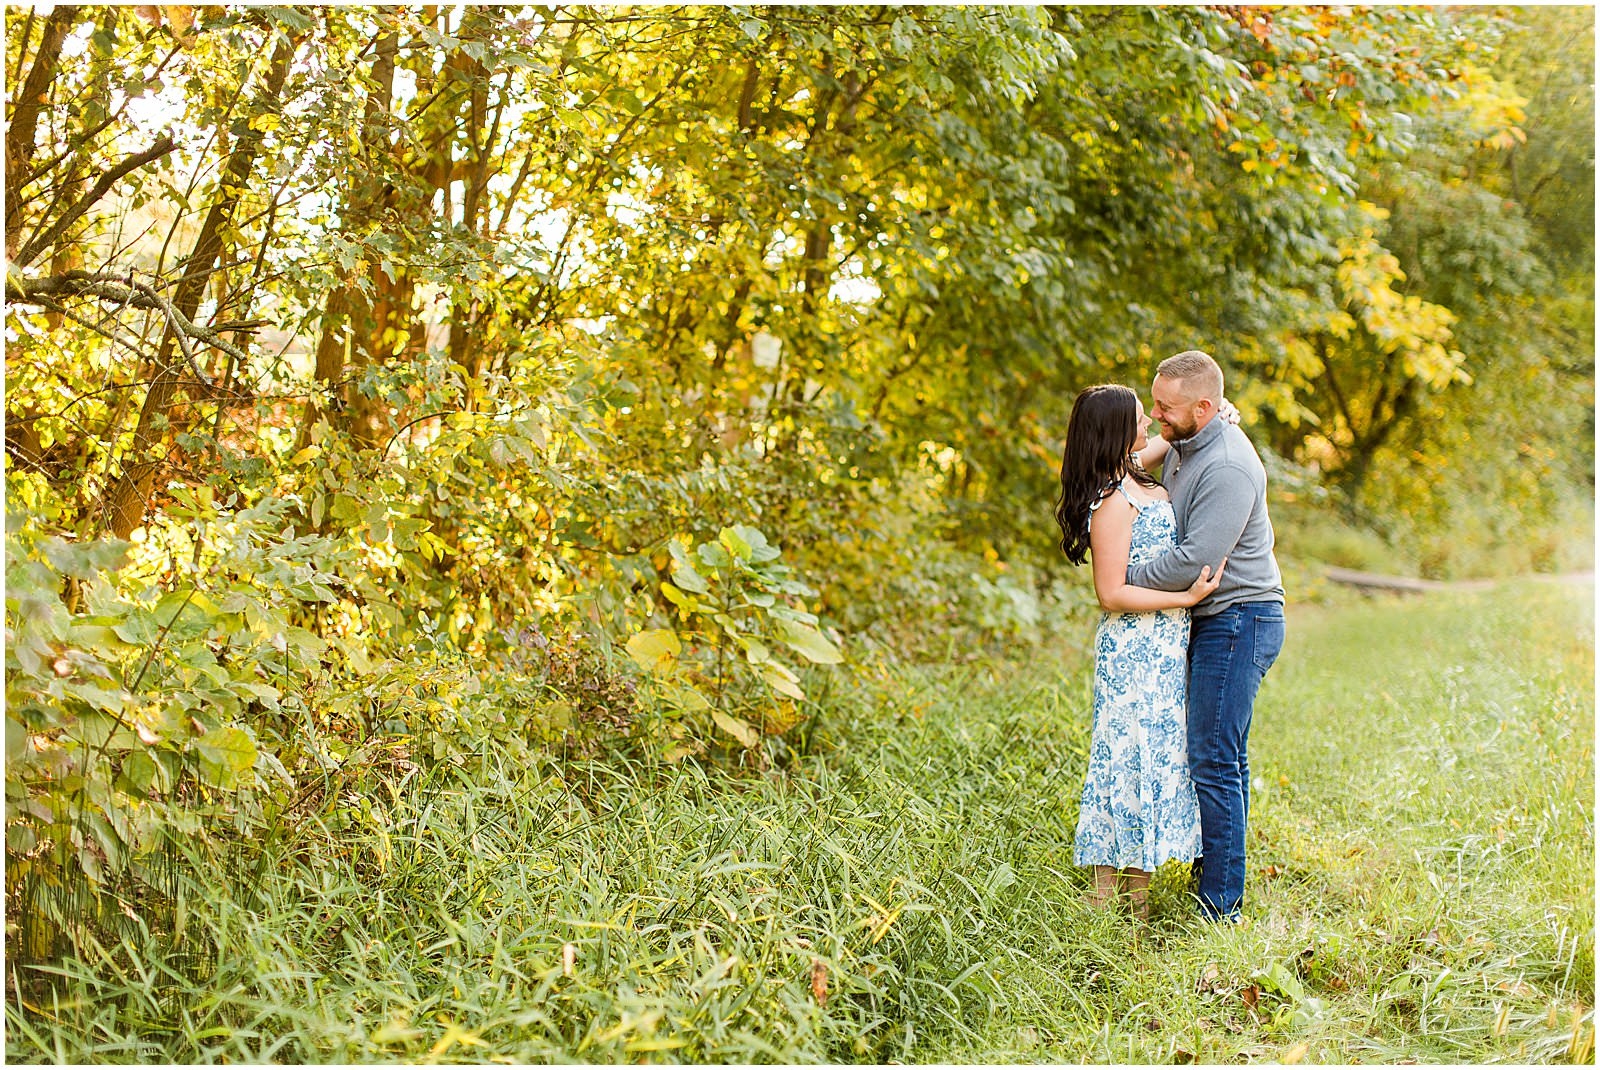 A Rolling Hills Country Club Engagement Session | Meagan and Kyle | Bret and Brandie Photography 0027.jpg